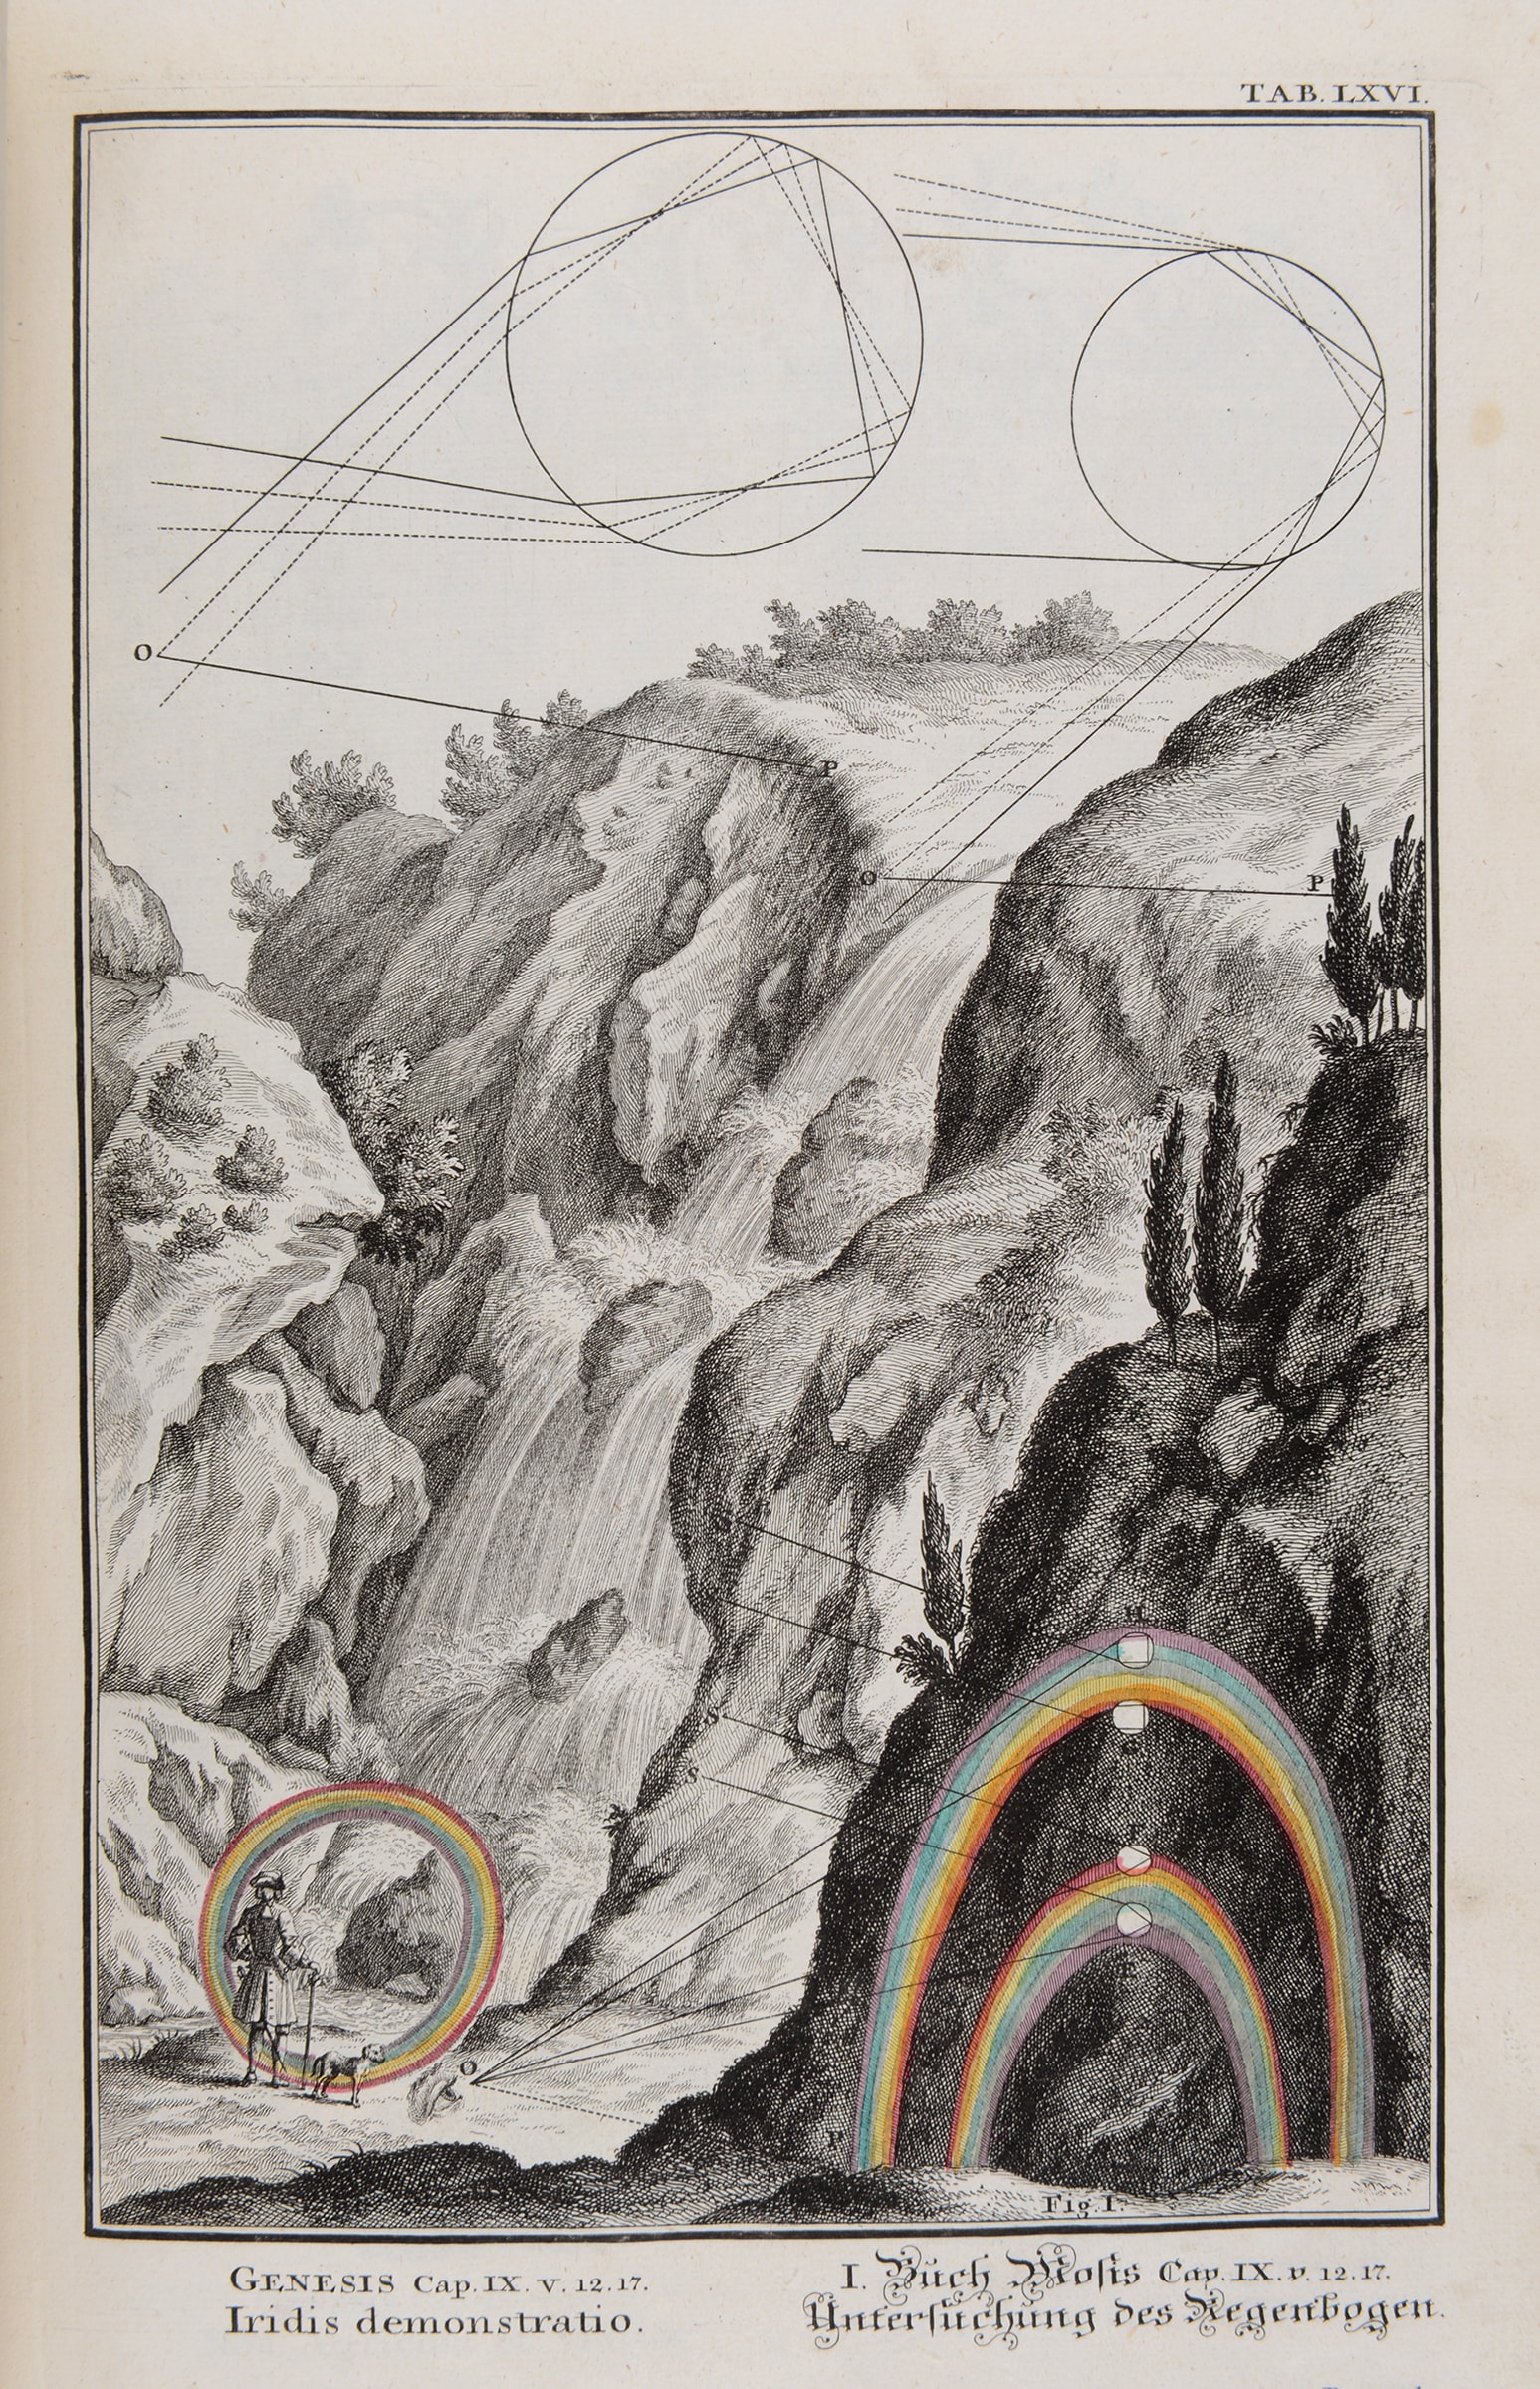 Old-world sketch of waterfall and rainbows refracting light.